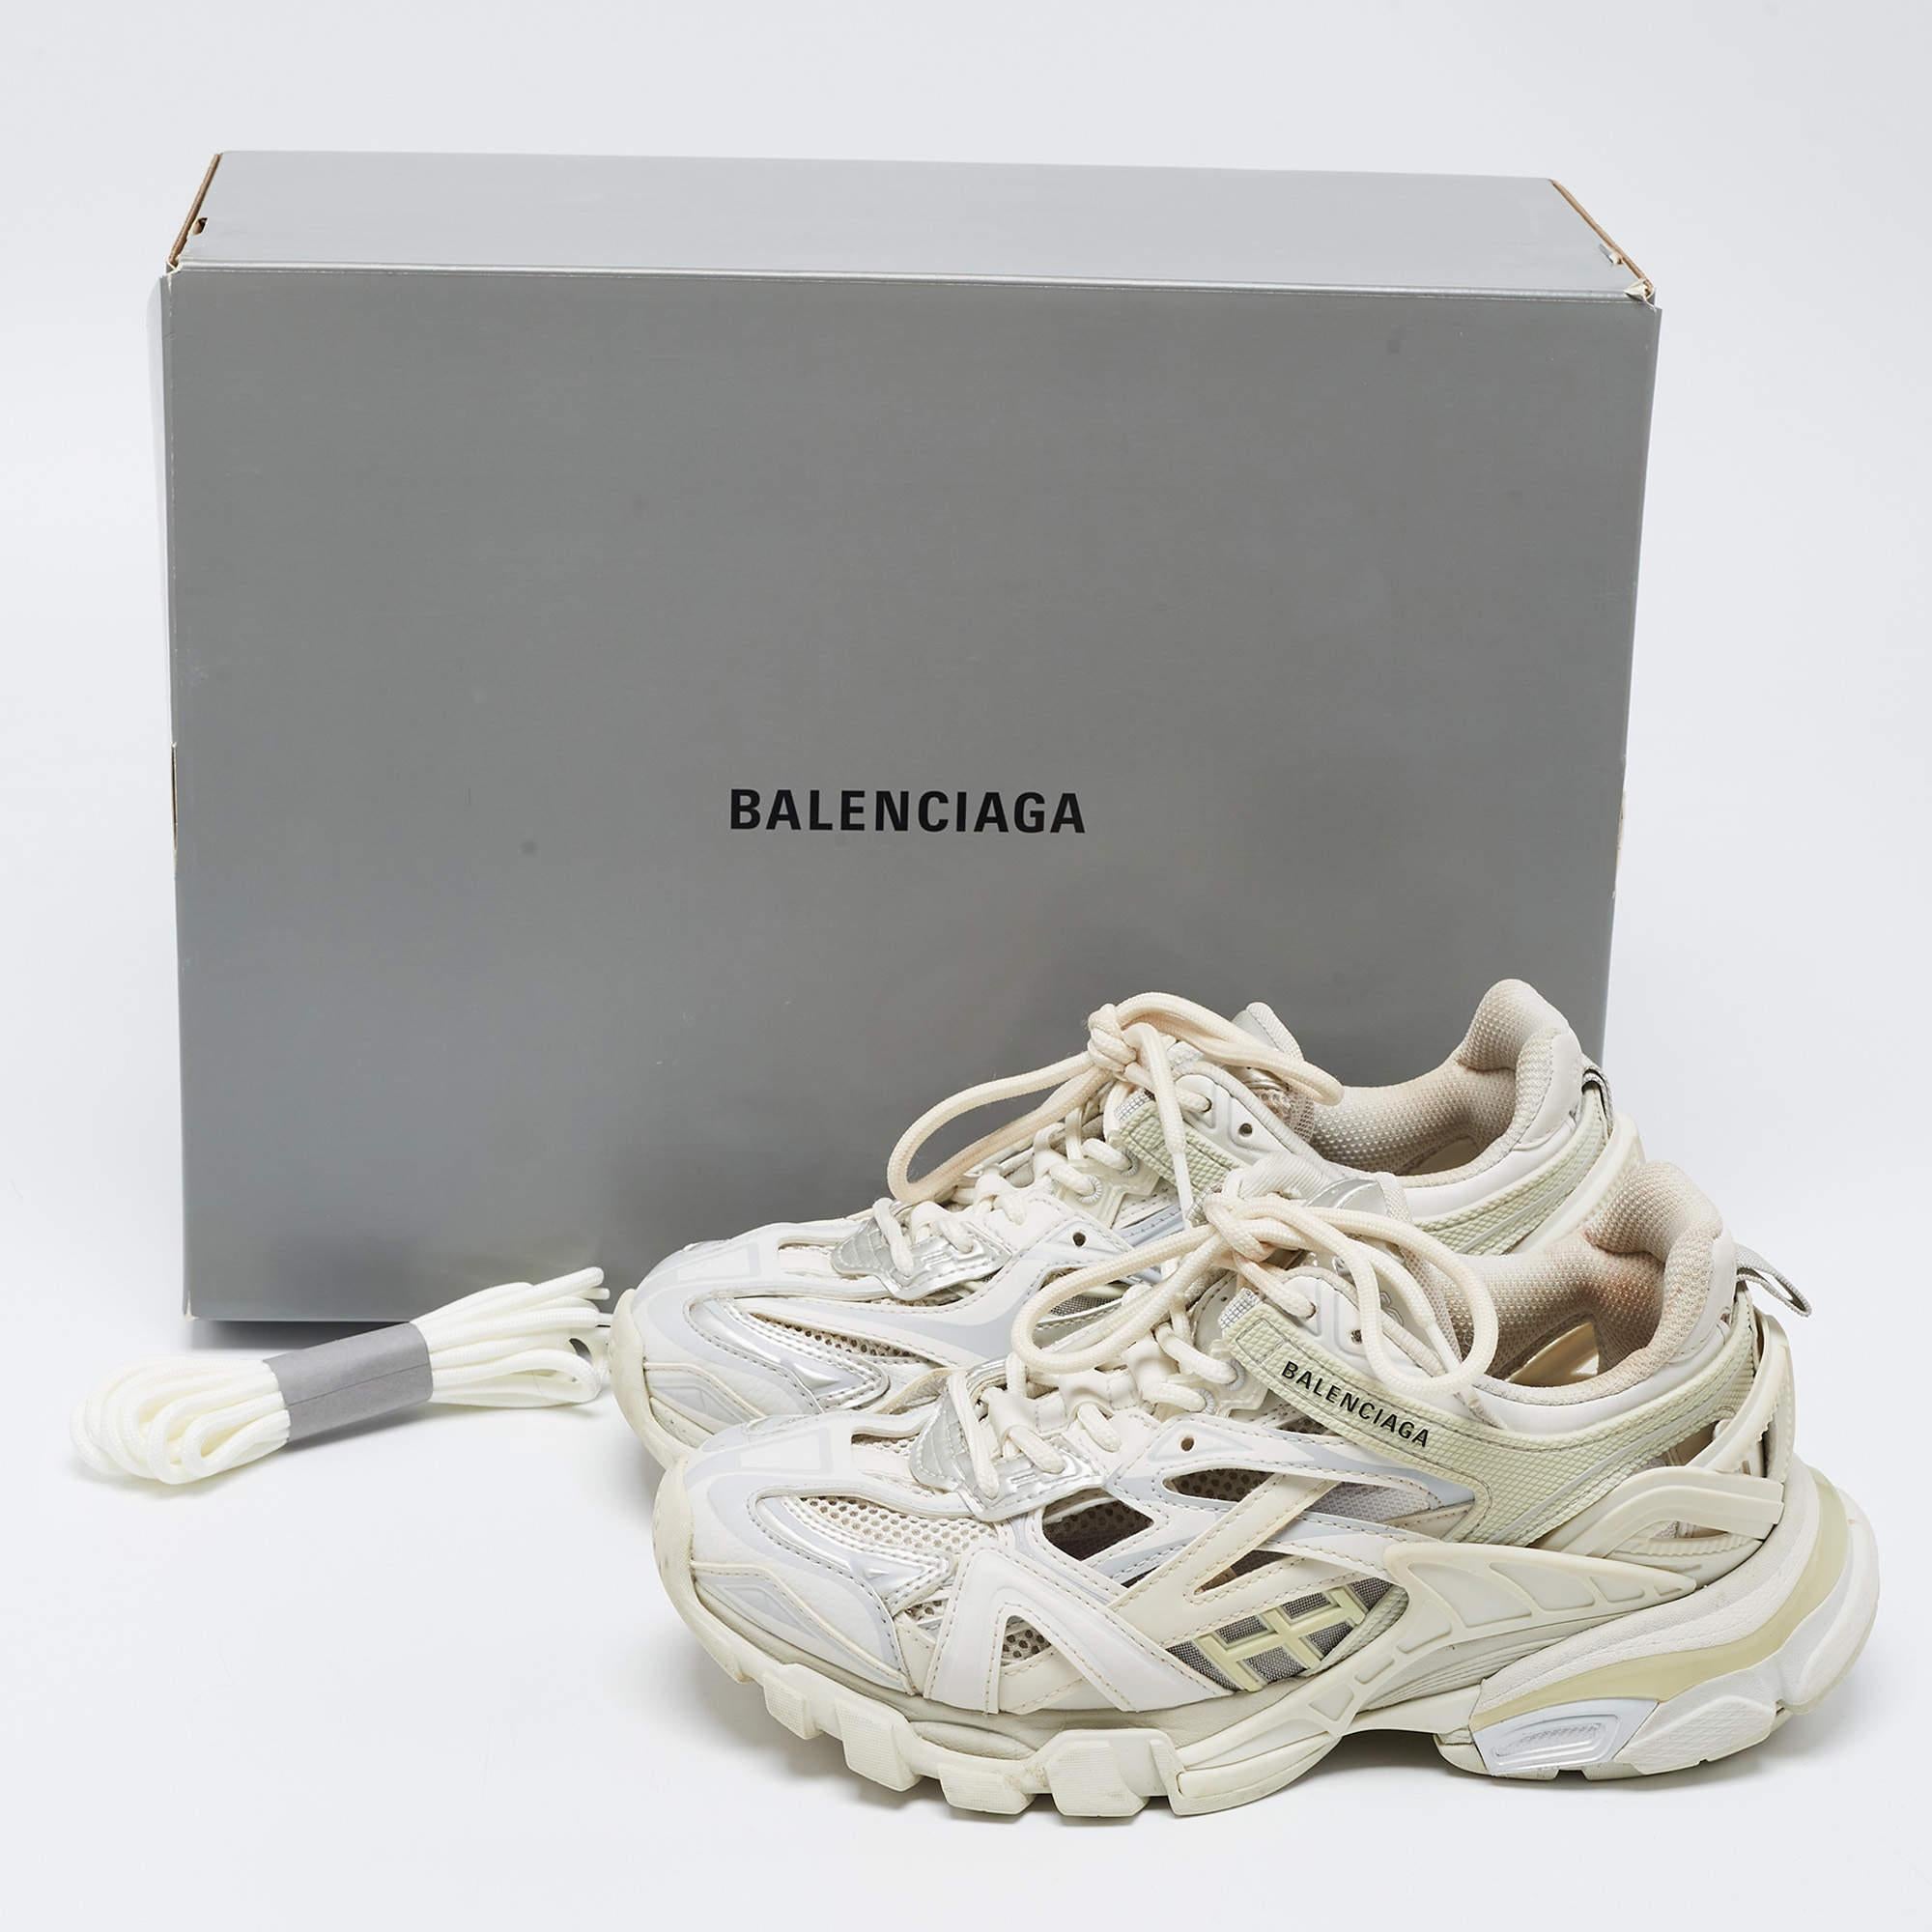 Balenciaga White/Grey Leather and Mesh Track Sneakers Size 37 7